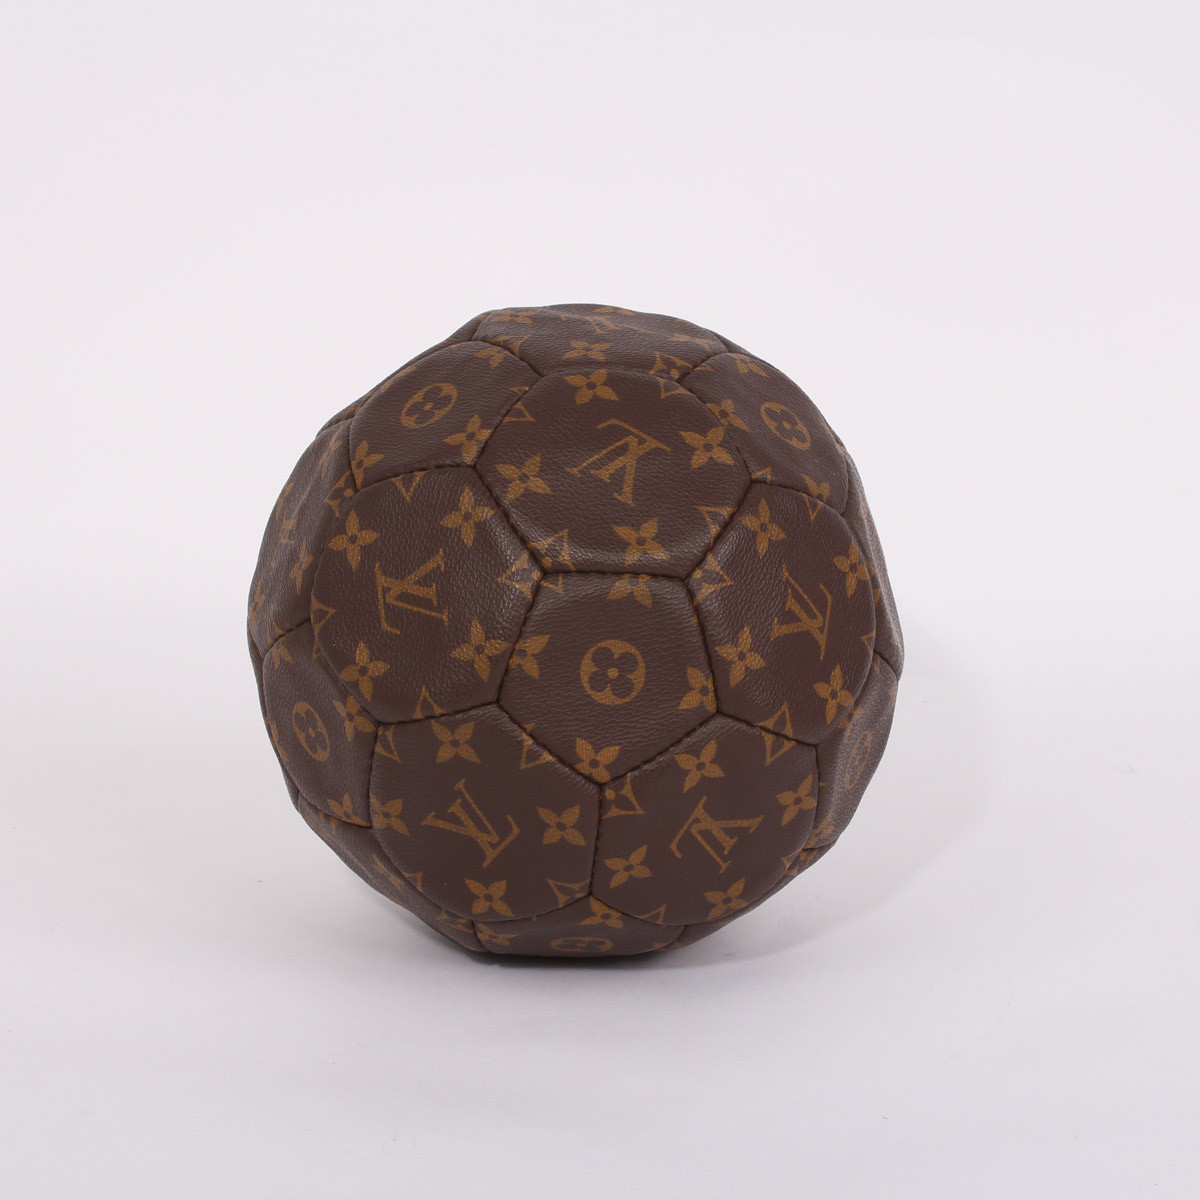 Louis Vuitton World Cup Limited Edition Soccer Ball - Brown Decorative  Accents, Decor & Accessories - LOU207463